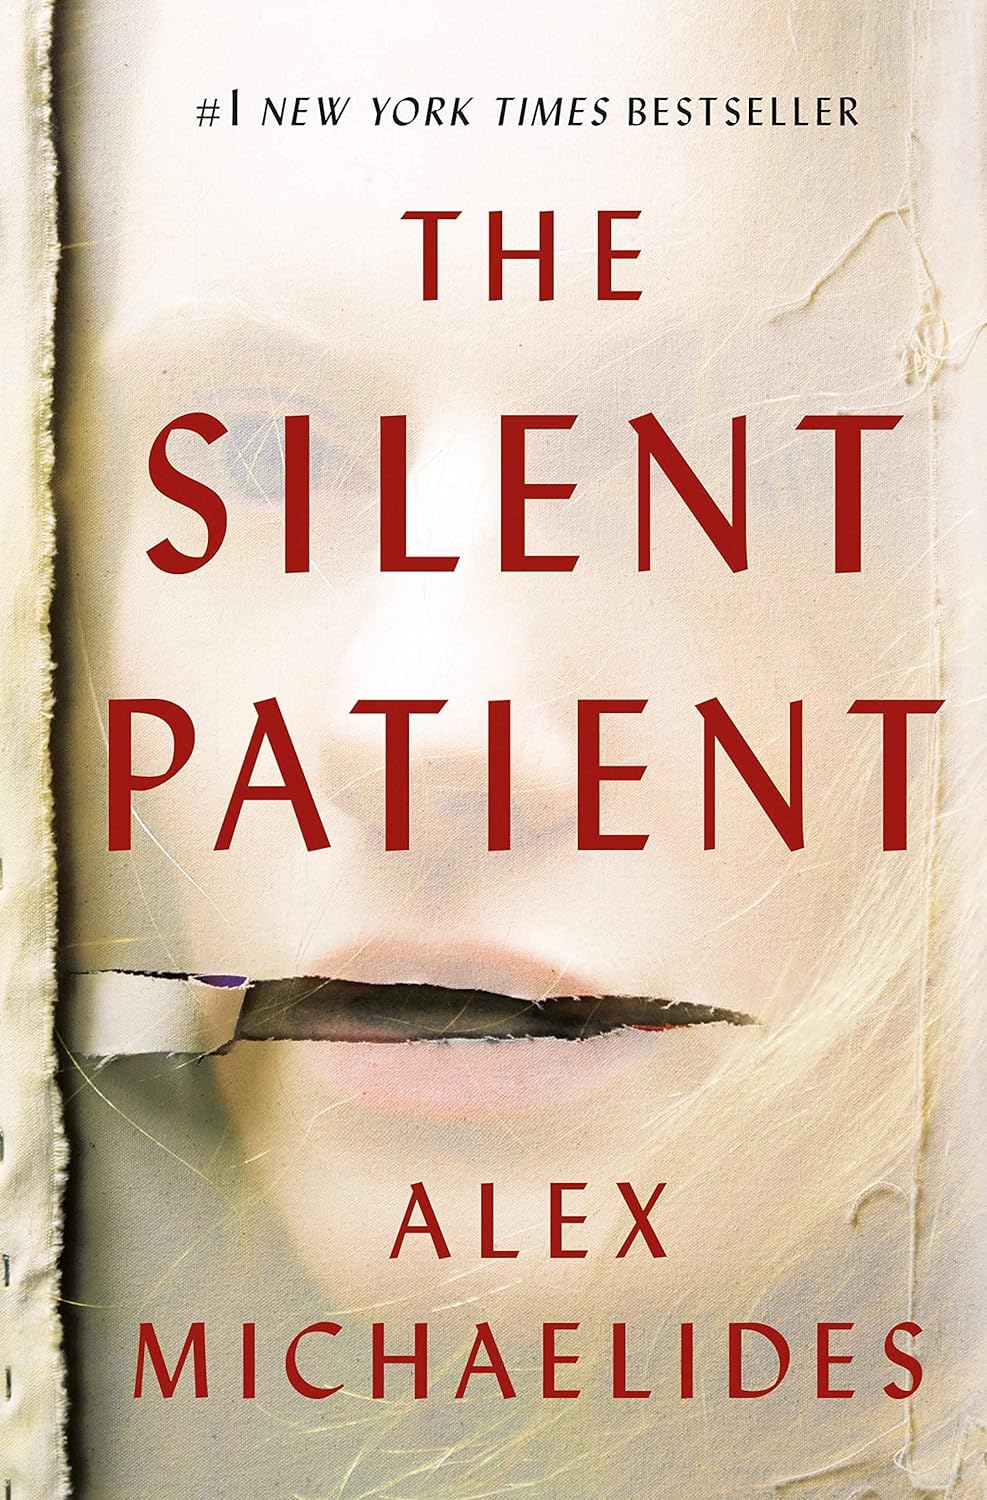 Locked Voices: Tales Inspired by 'The Silent Patient Hardcover – February 5, 2019 by Alex Michaeli